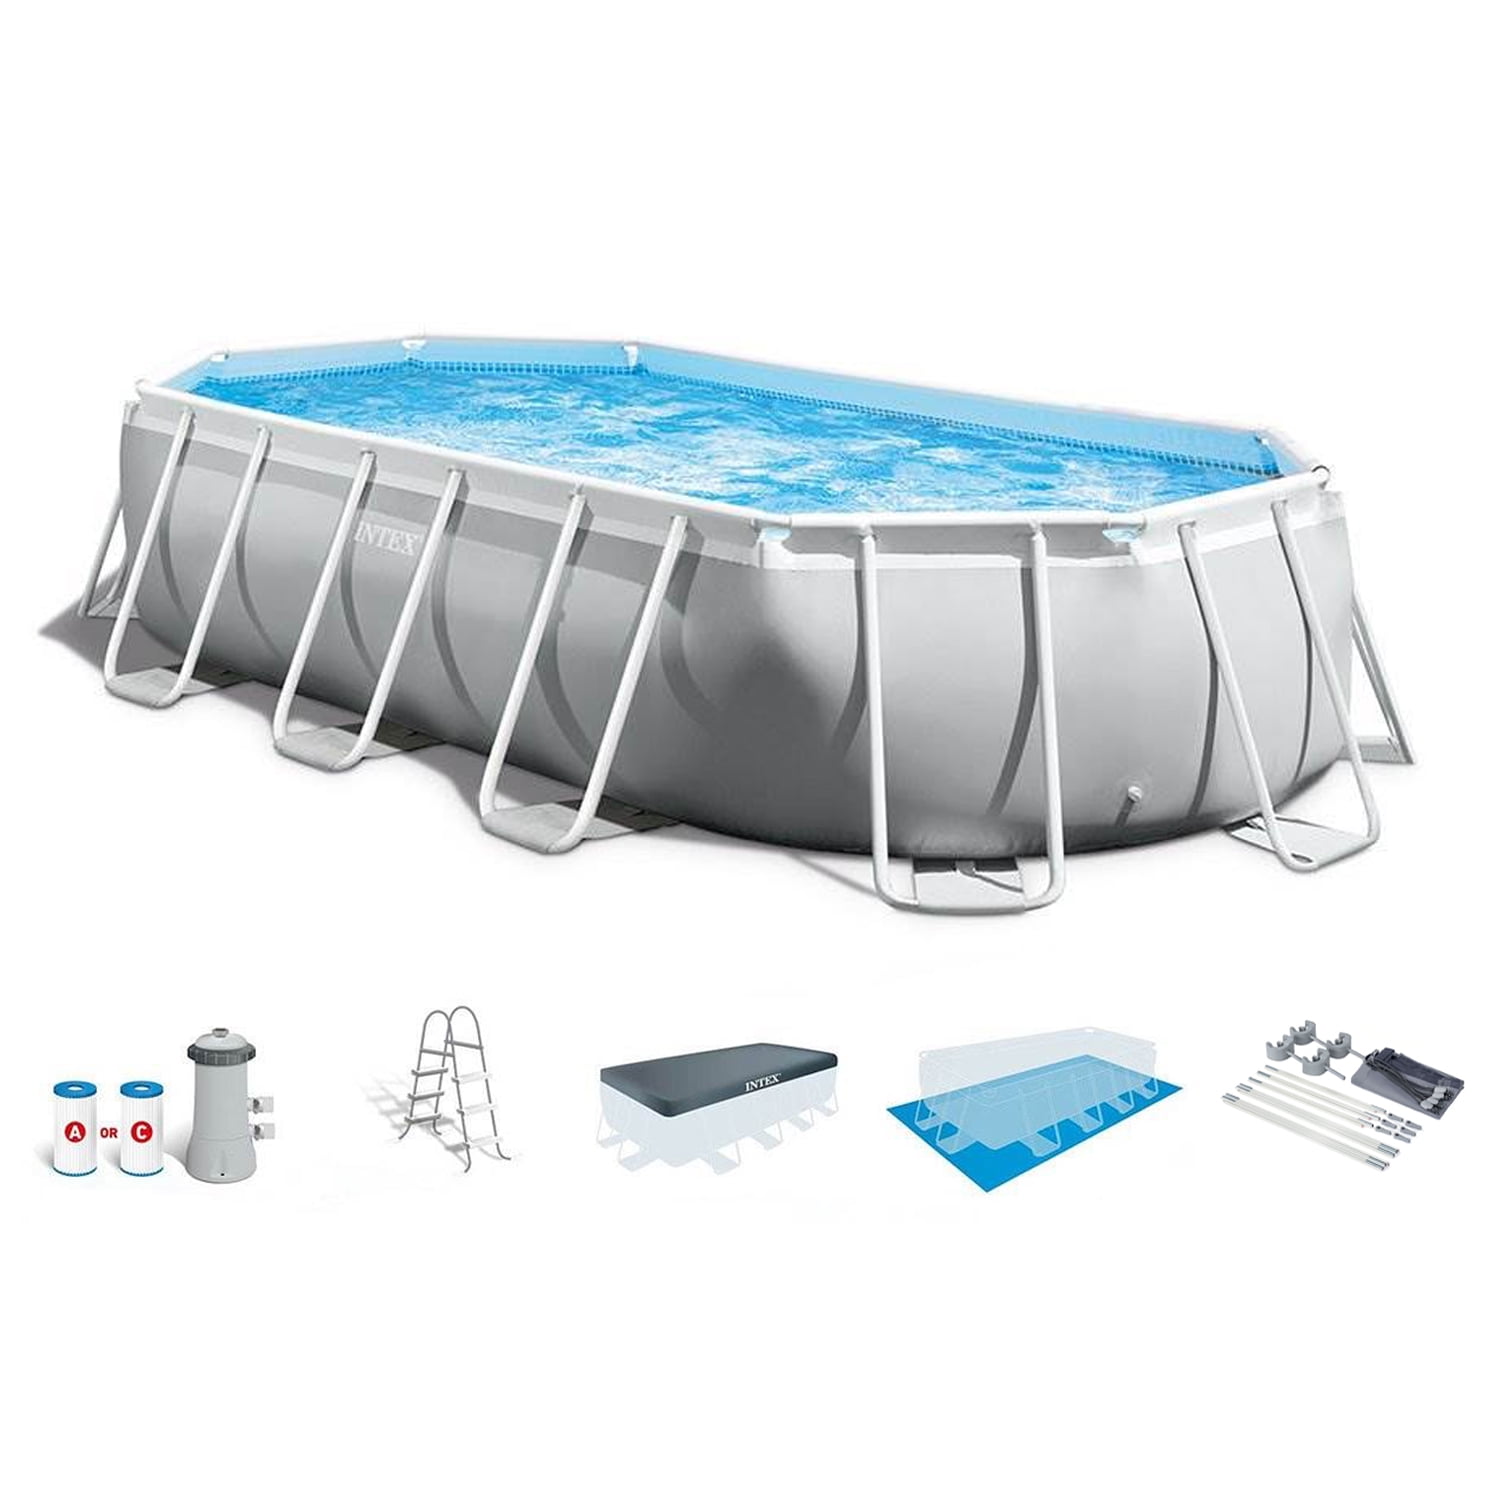 Intex Prism Frame Oval Above Ground Swimming Pool Set Protective Canopy - Walmart.com